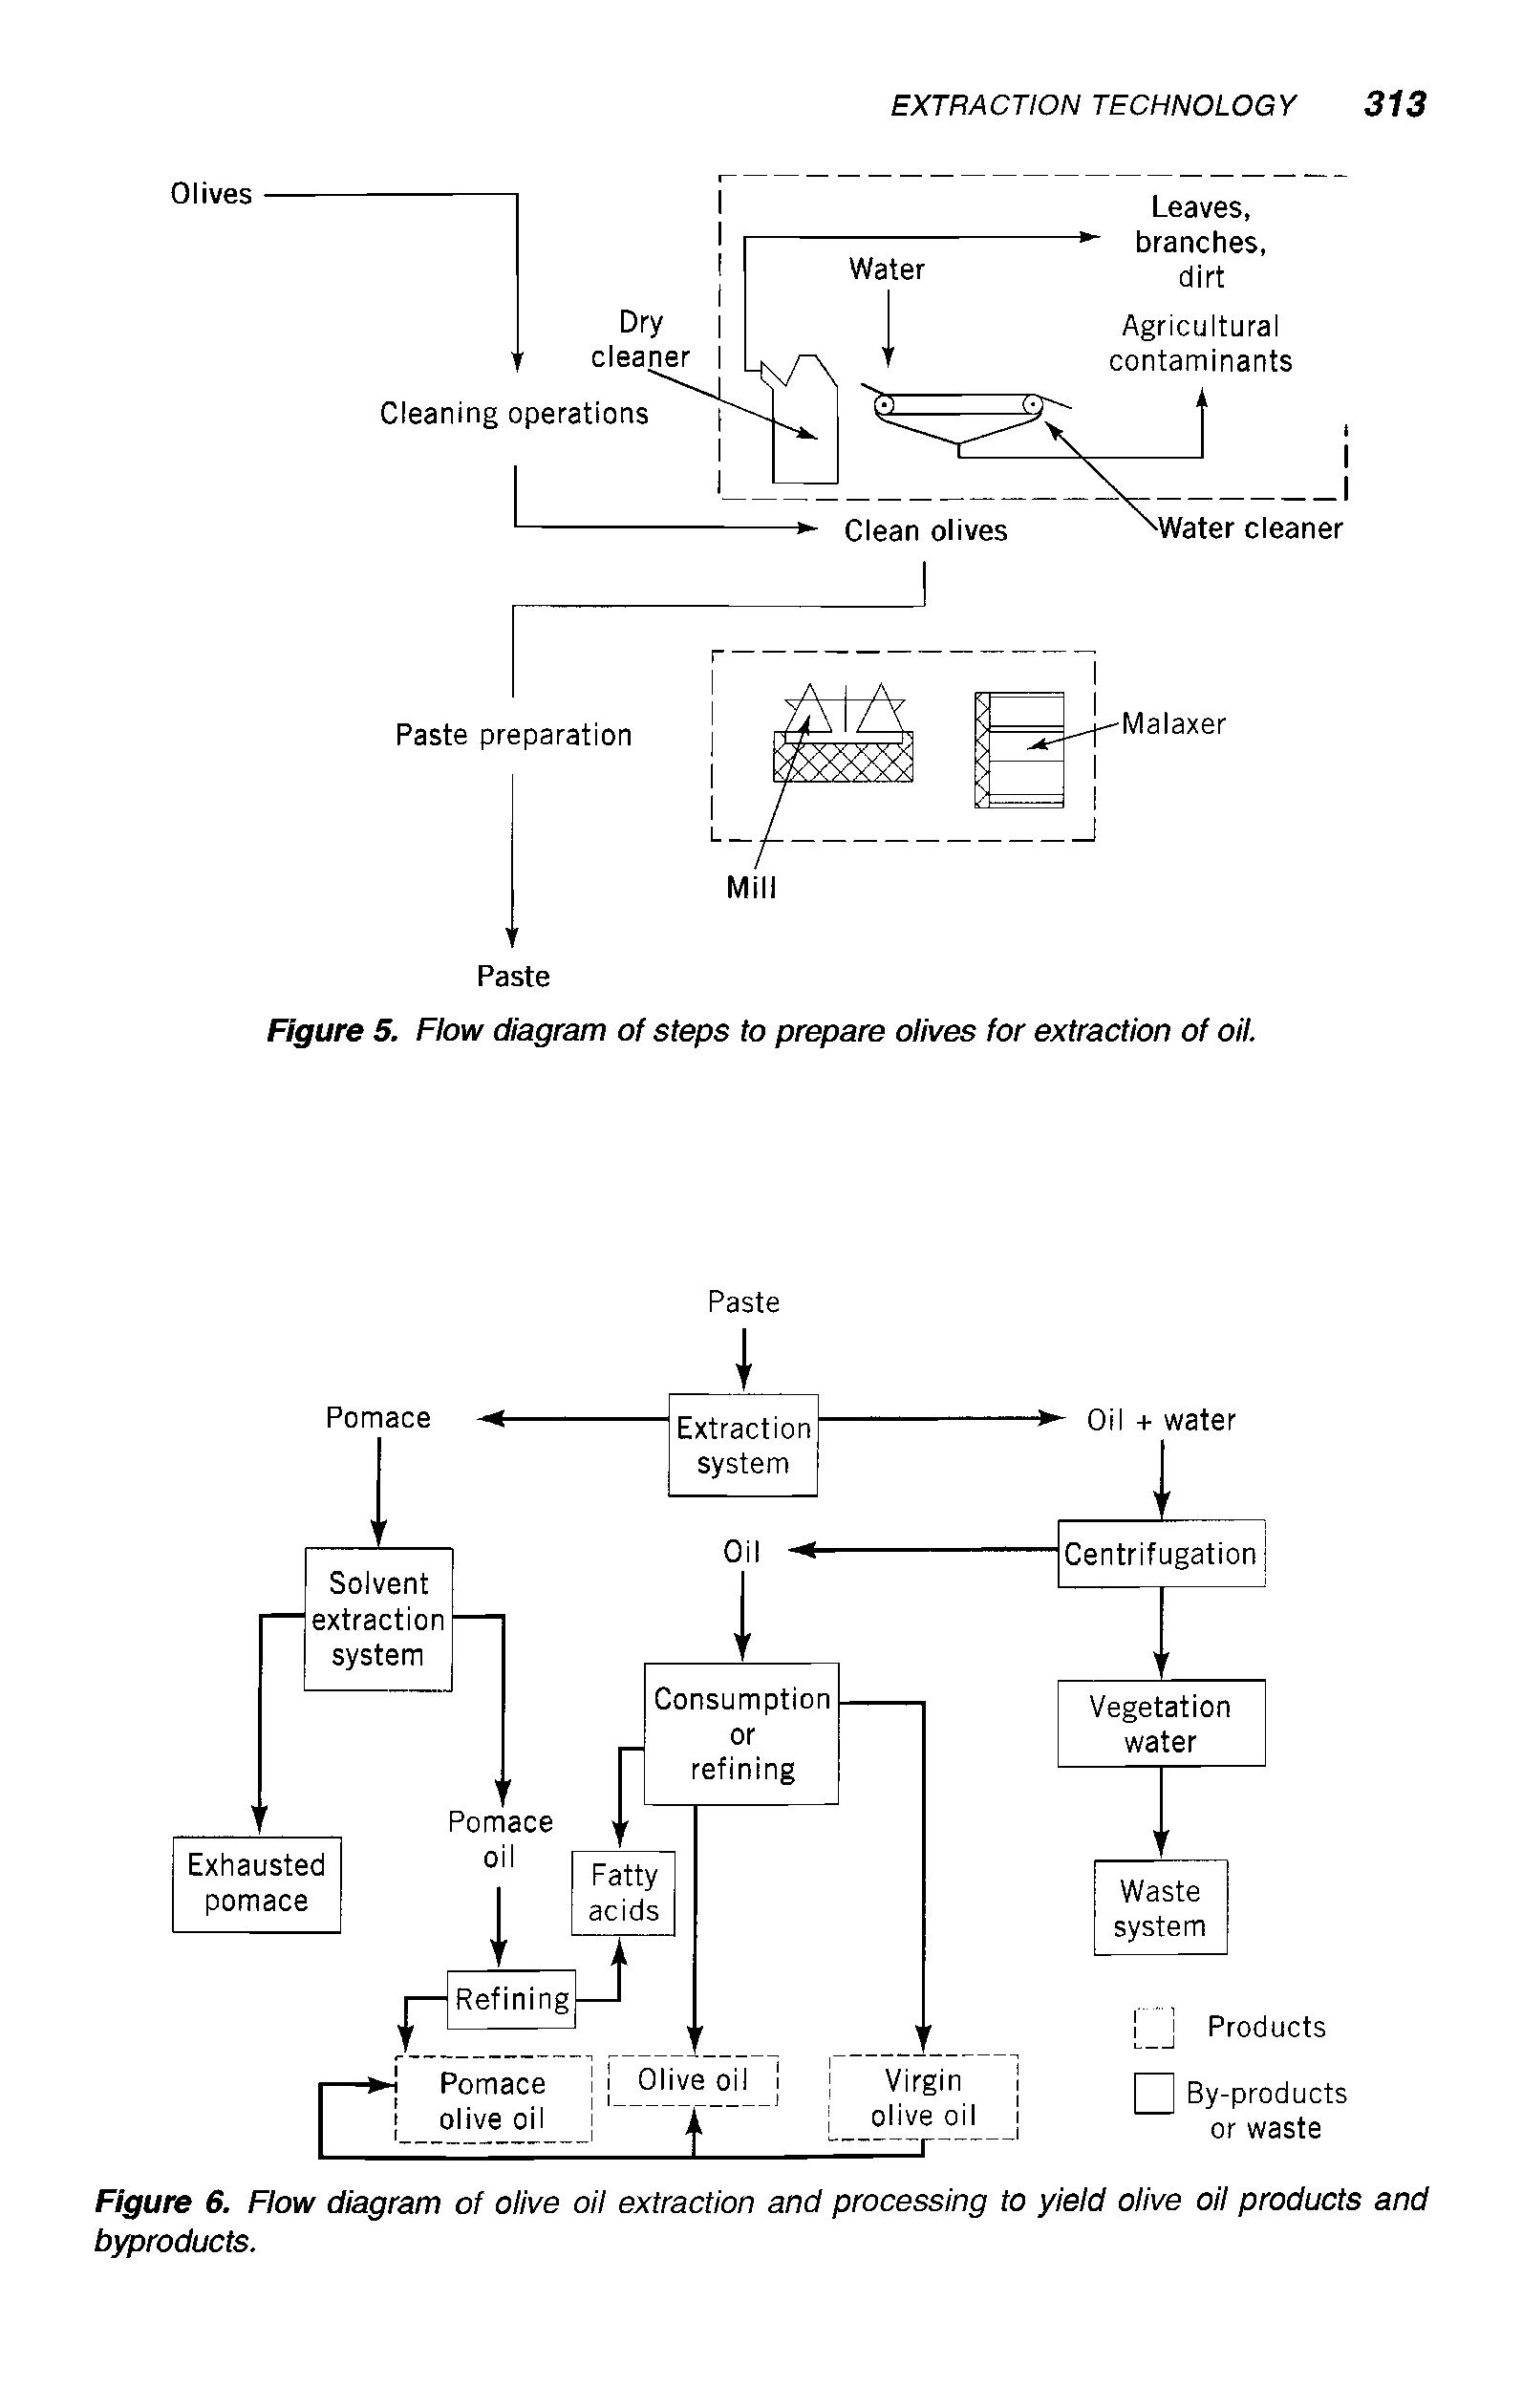 Figure 6. Flow diagram of olive oil extraction and processing to yield olive oil products and byproducts.